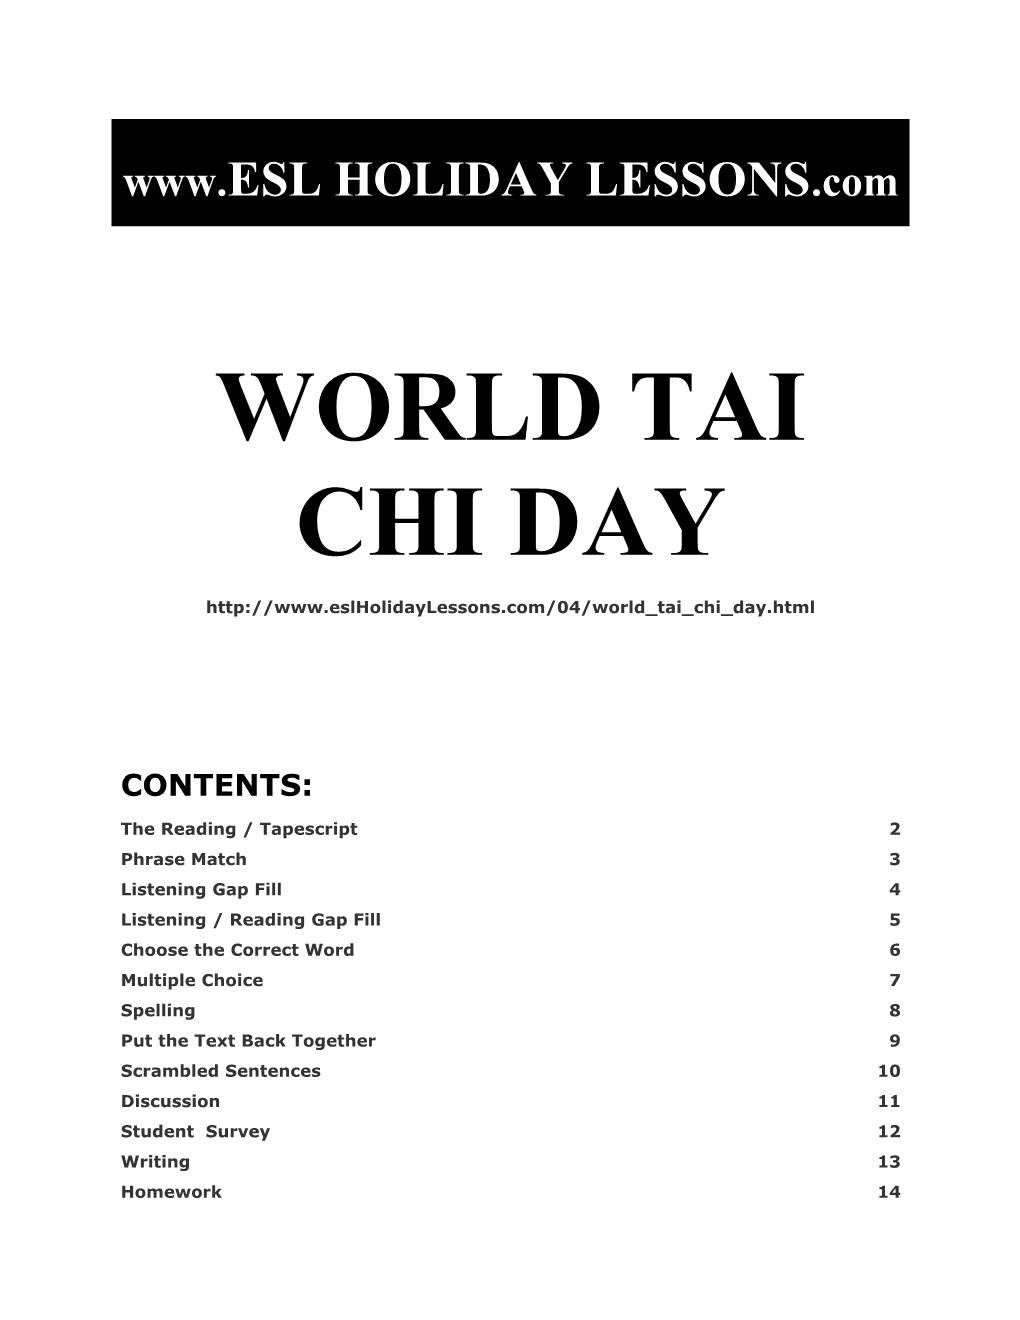 Holiday Lessons - World Tai Chi Day